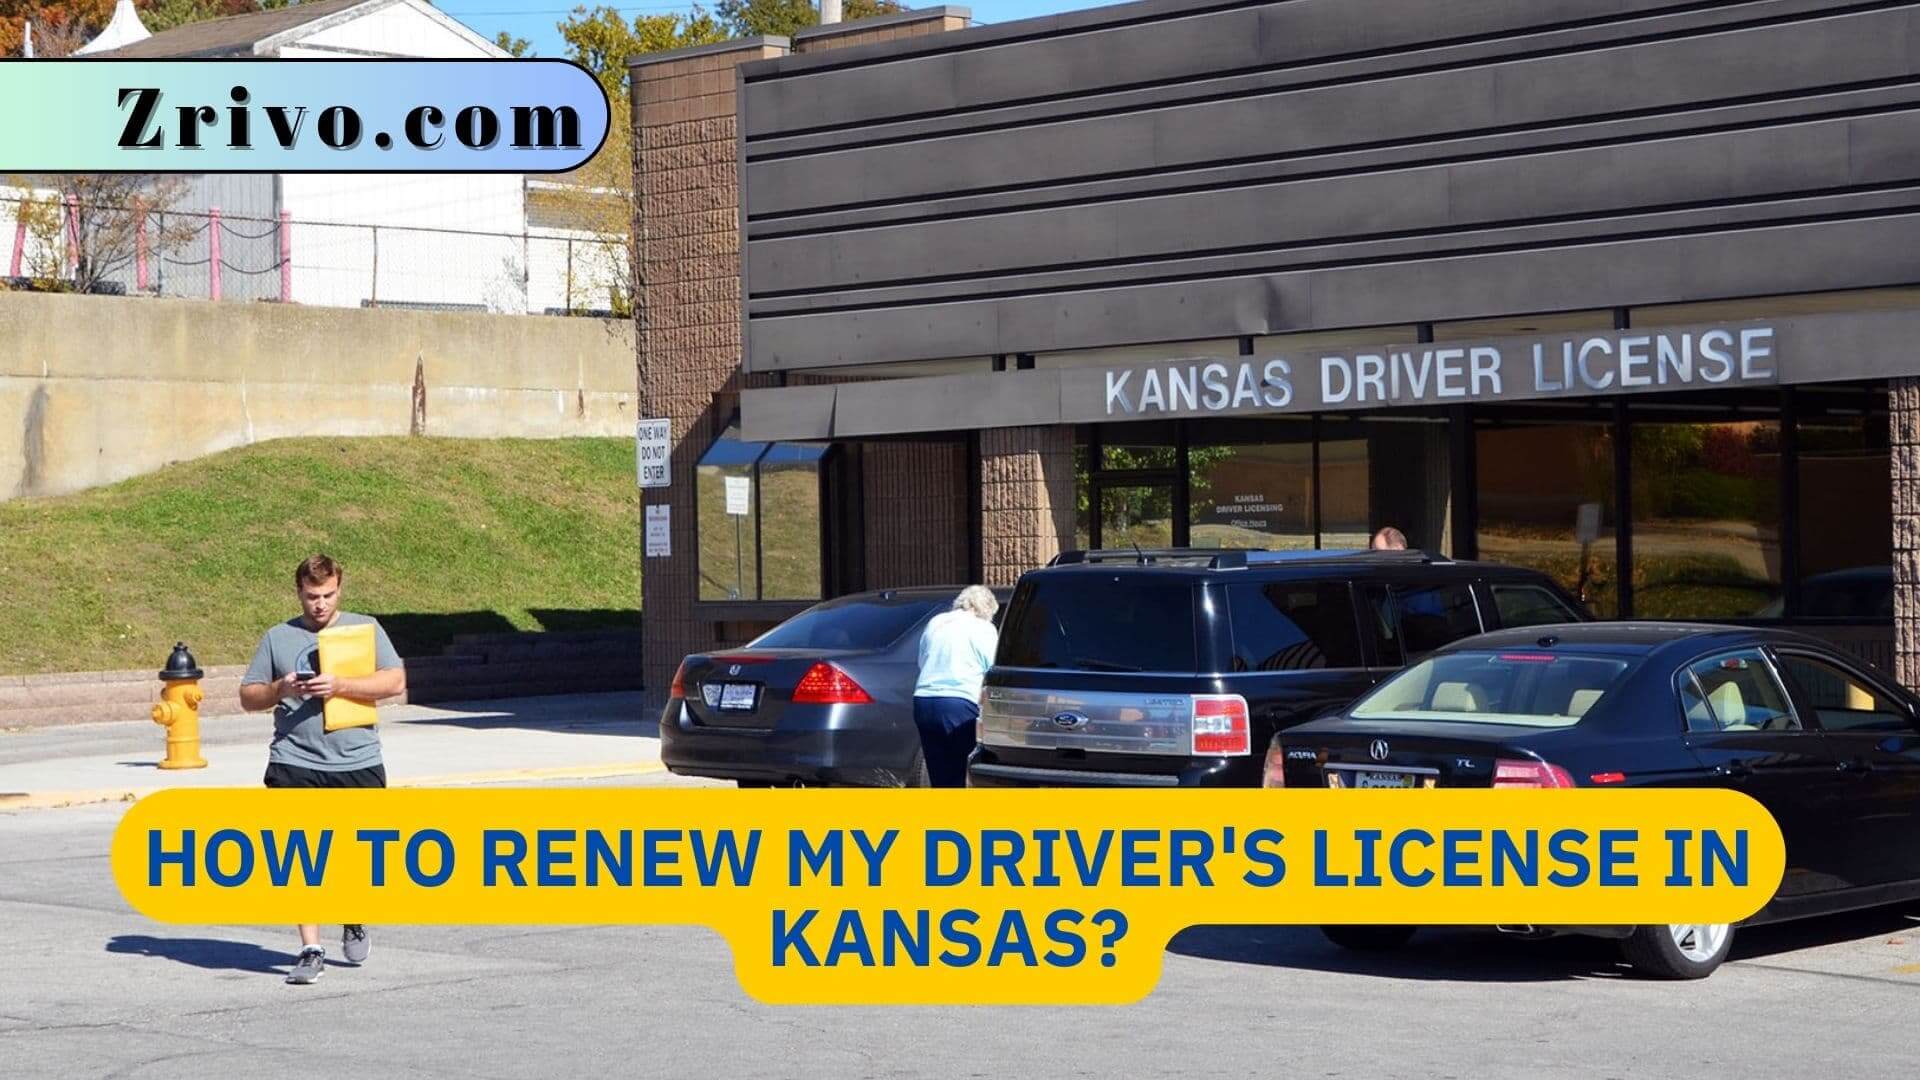 How to Renew My Driver's License in Kansas